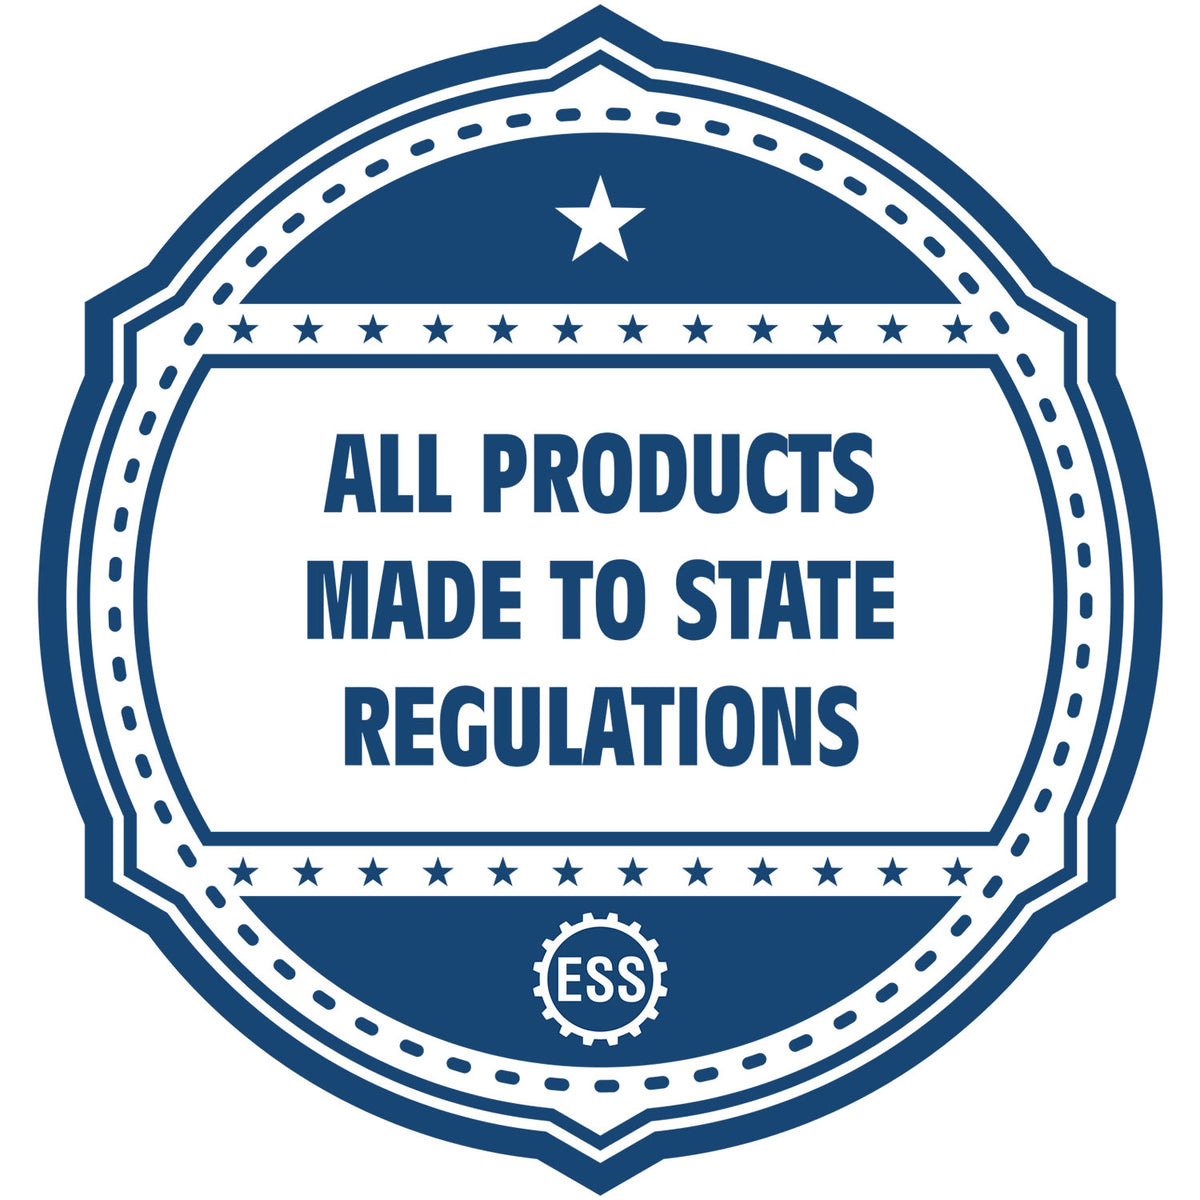 An icon or badge element for the Slim Pre-Inked Guam Professional Engineer Seal Stamp showing that this product is made in compliance with state regulations.